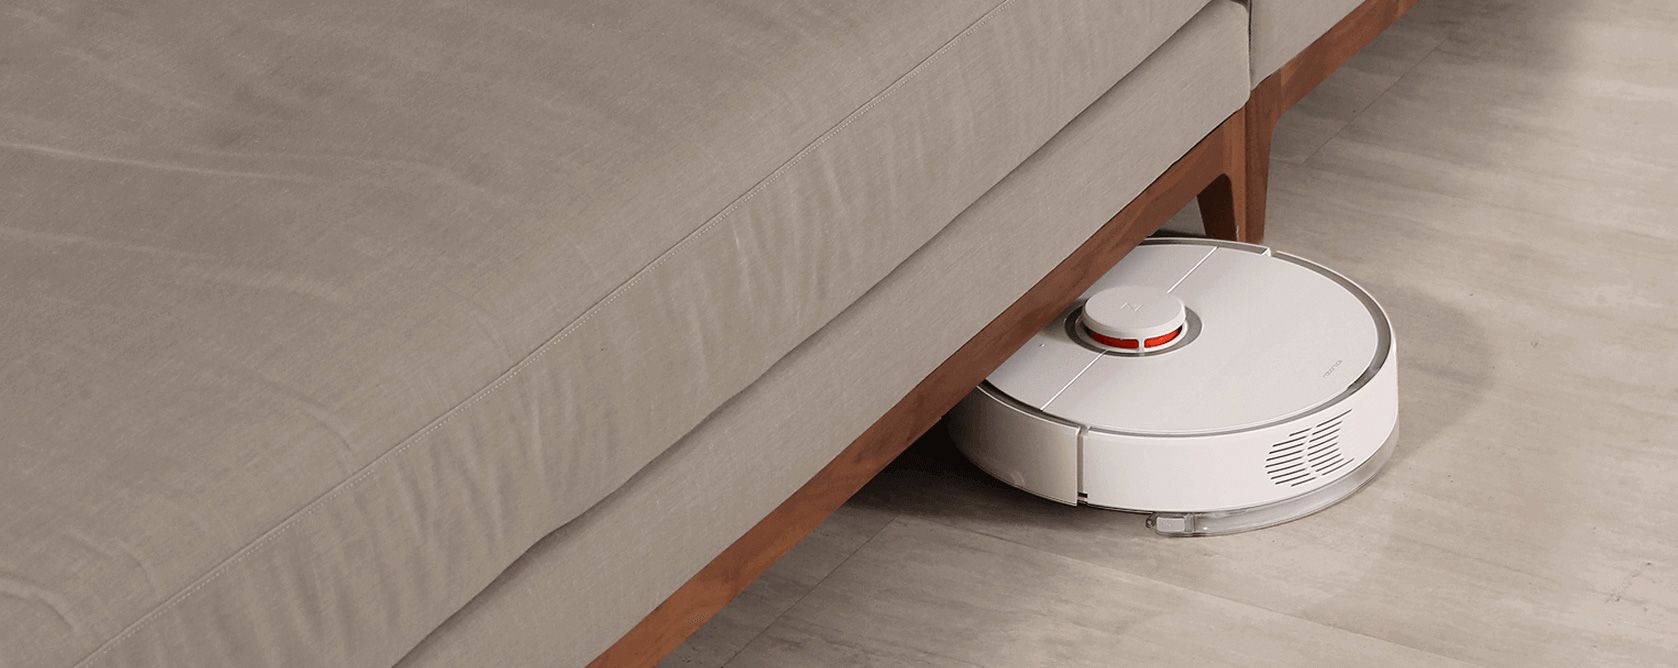 Five Reasons we will all have a robot vacuum cleaner by 2025